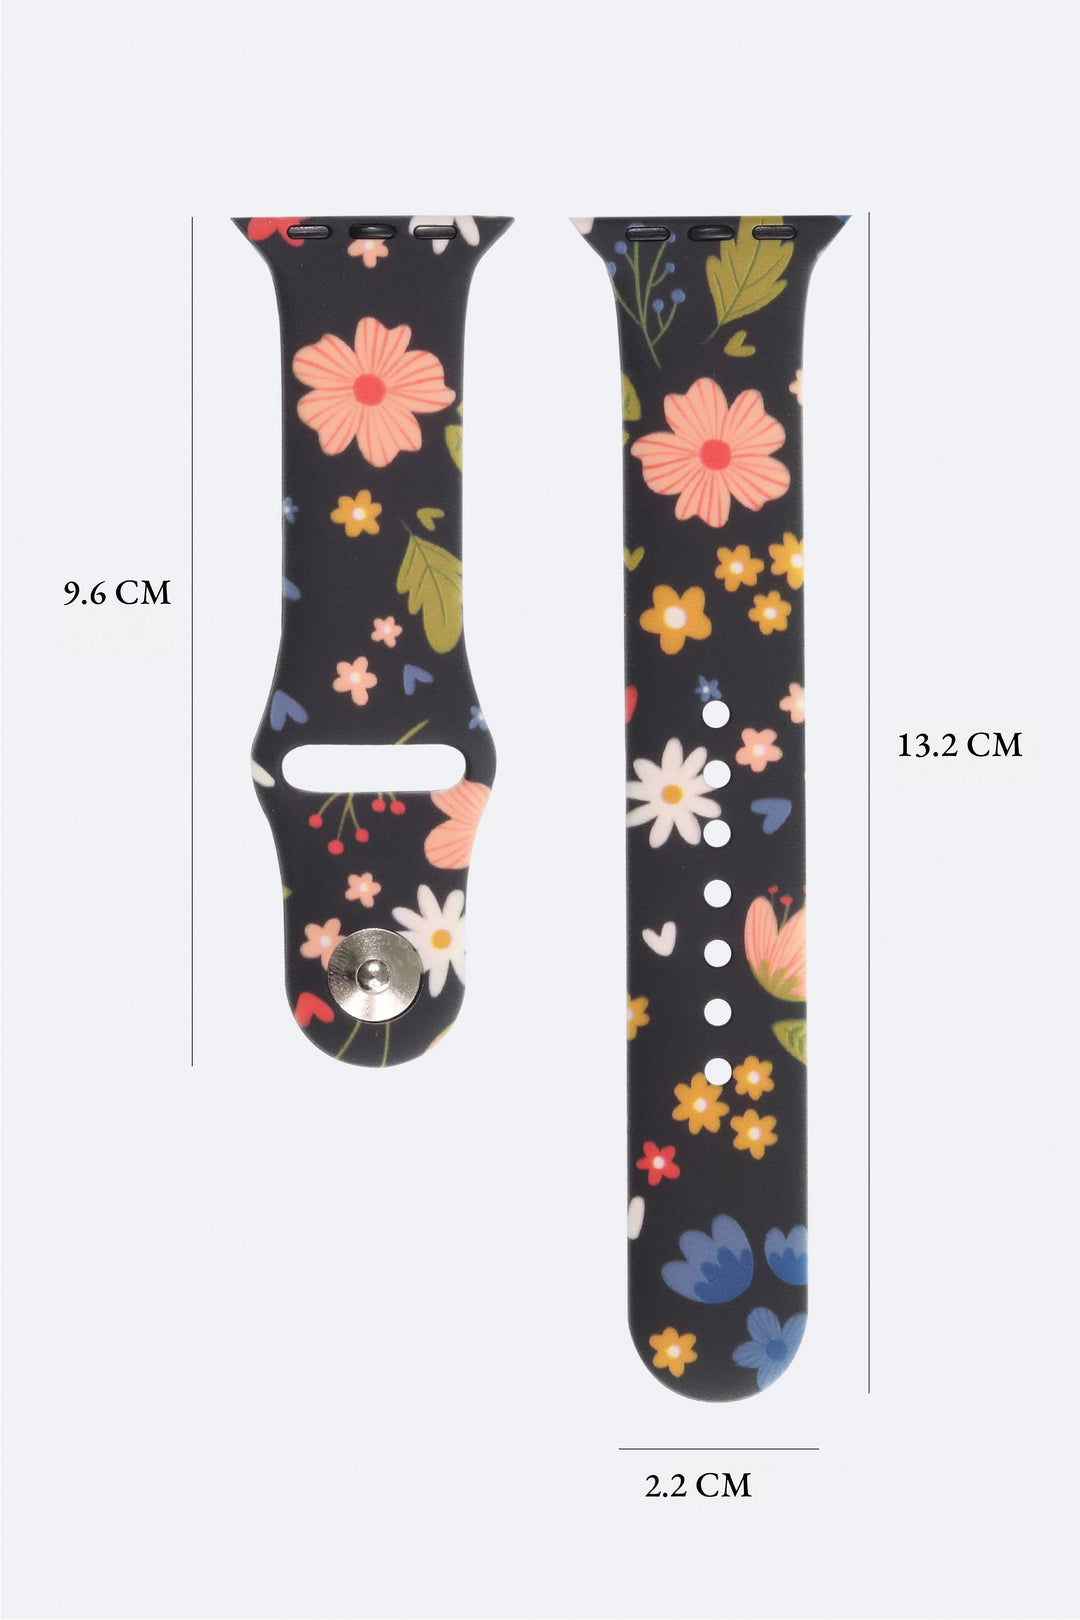 Happy Bloom 22mm Watch Strap with Push Button